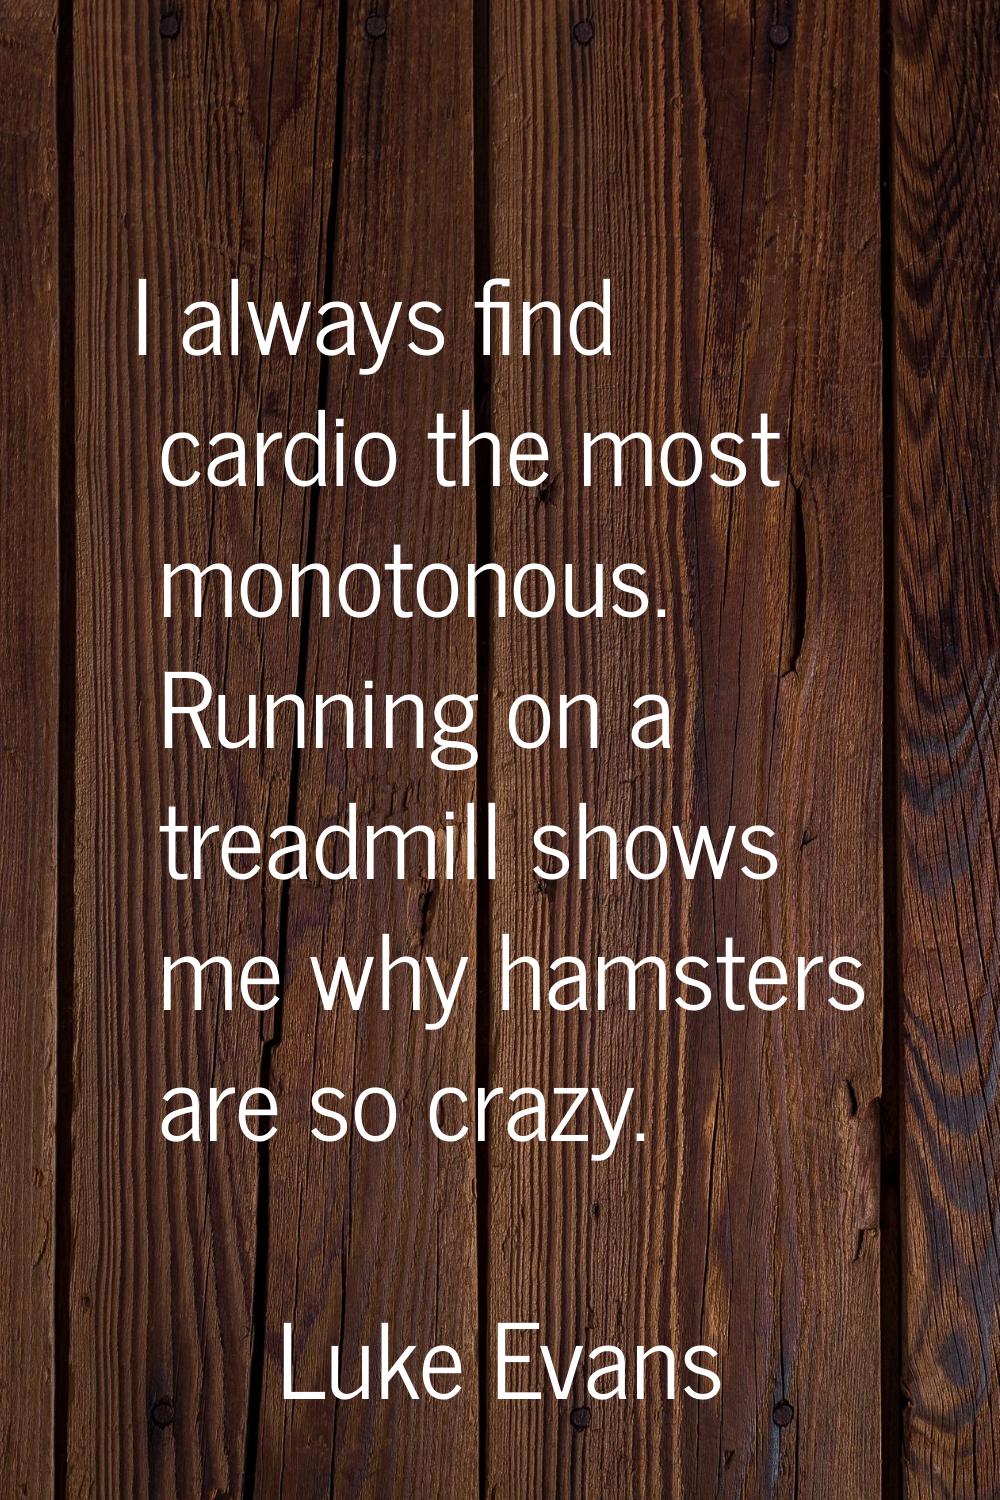 I always find cardio the most monotonous. Running on a treadmill shows me why hamsters are so crazy